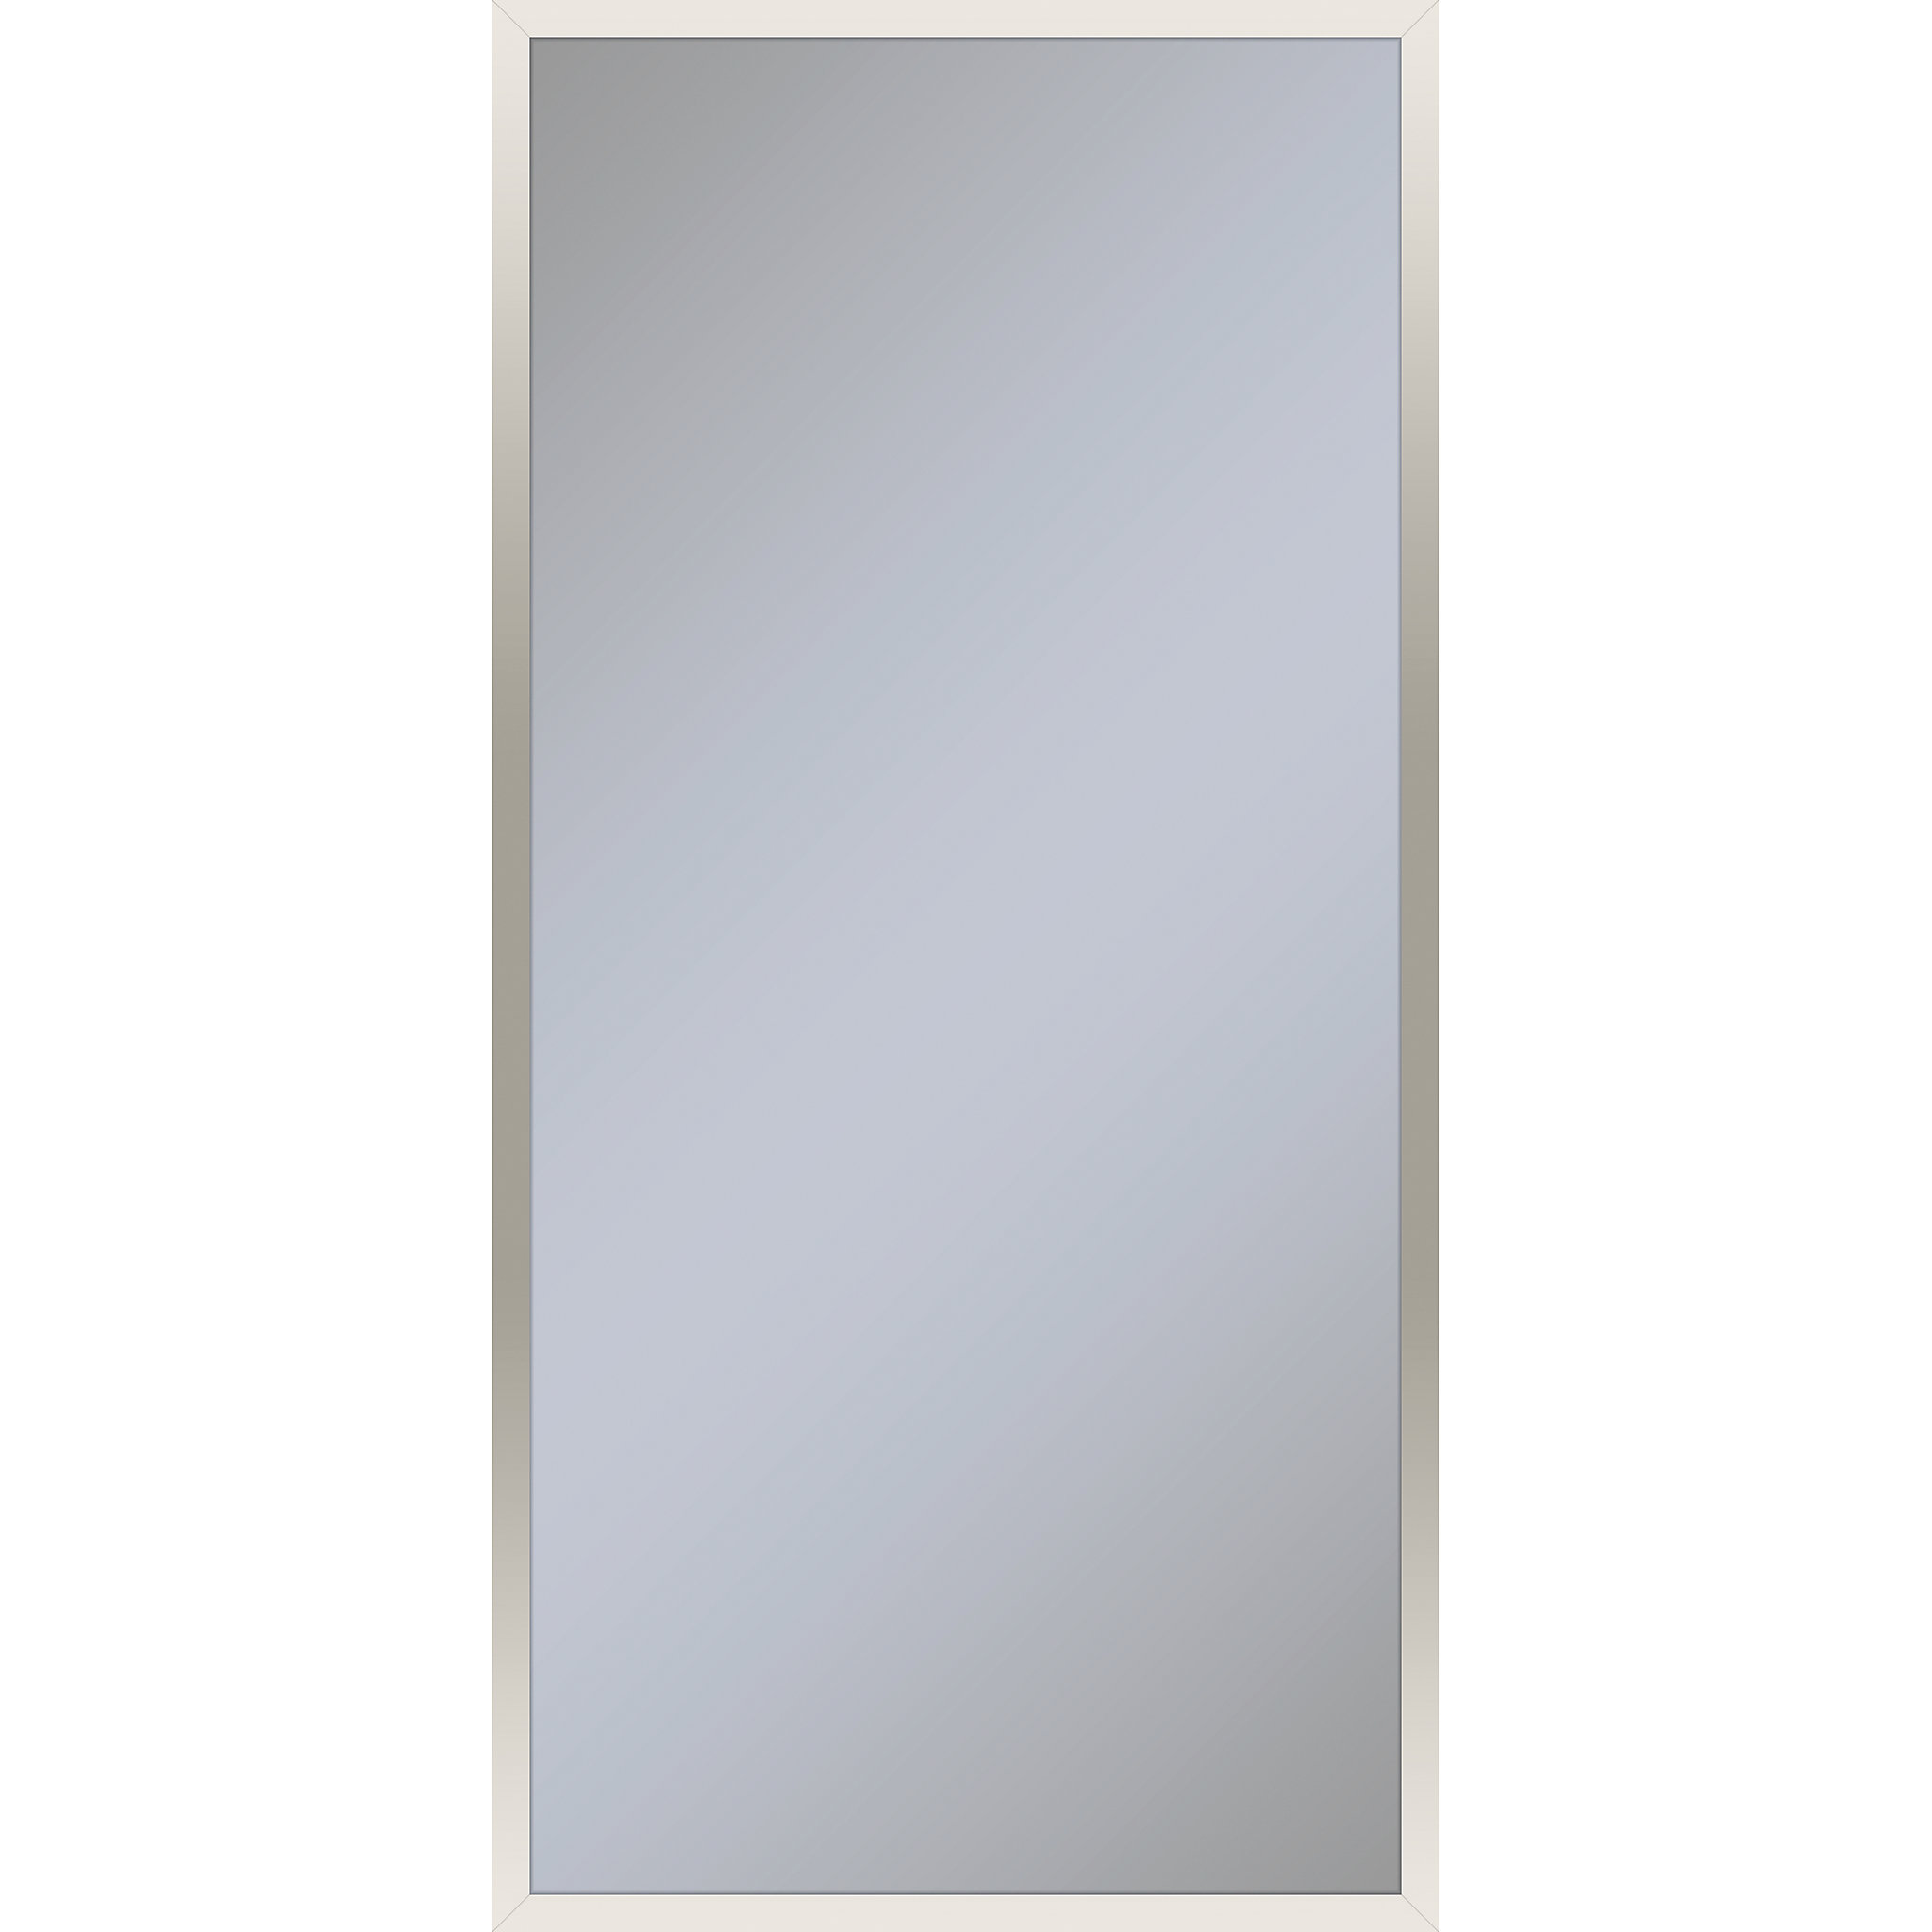 Robern PC2040D4TNN77 Profiles Framed Cabinet, 20" x 40" x 4", Polished Nickel, Non-Electric, Reversible Hinge